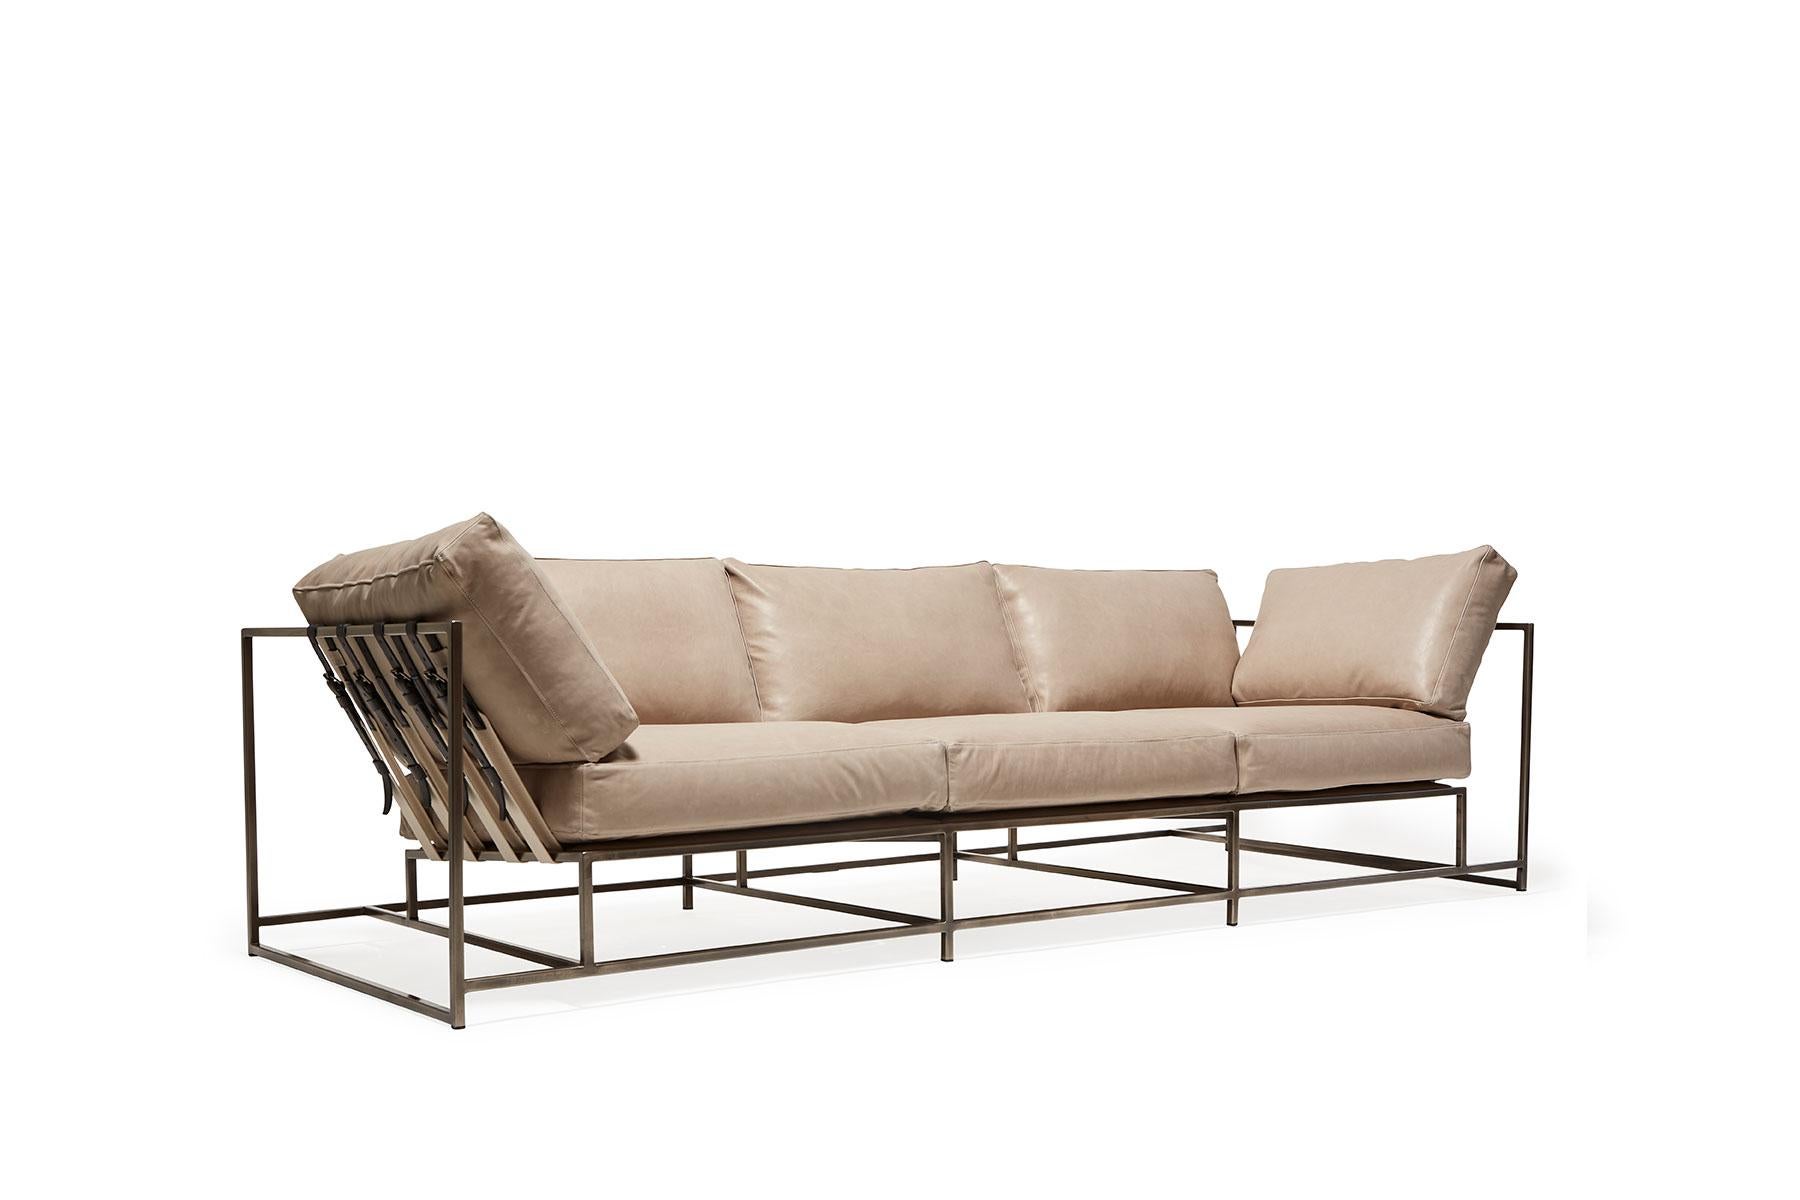 The Inheritance Sofa by Stephen Kenn is as comfortable as it is unique. The design features an exposed construction composed of three elements - a steel frame, plush upholstery, and supportive belts. The deep seating area is perfect for a relaxing